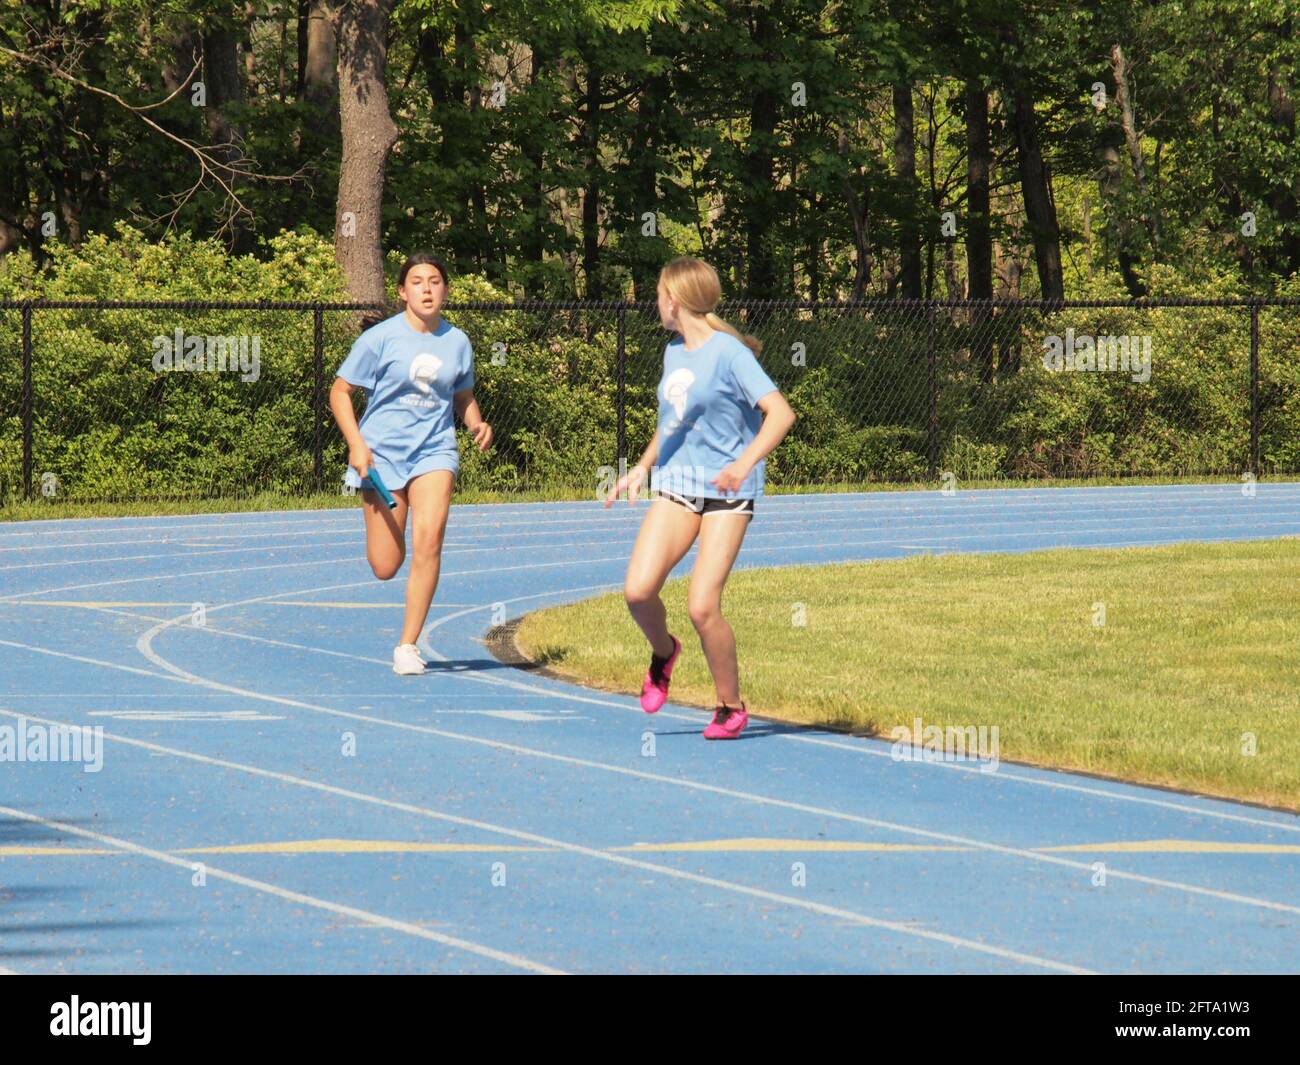 Middle school track meet with relay race hand-off and sprinting girl at the finish line. Stock Photo